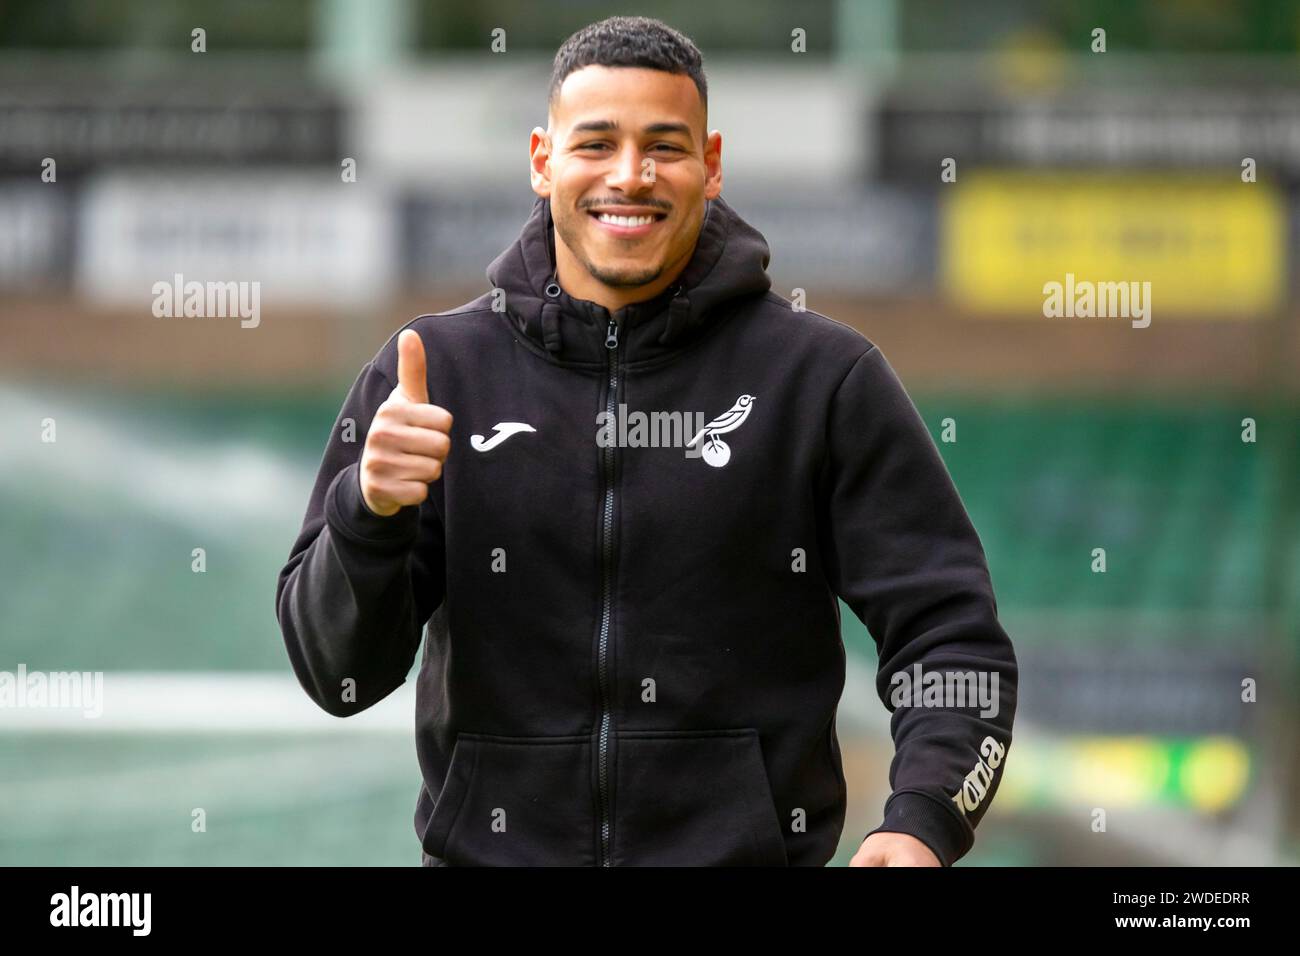 Norwich City Onel Hernandez Is Seen Before The Sky Bet Championship Match Between Norwich City And West Bromwich Albion At Carrow Road Norwich On Saturday 20th January 2024 Photo David Watts Mi News Credit Mi News Sport Alamy Live News 2WDEDRR 